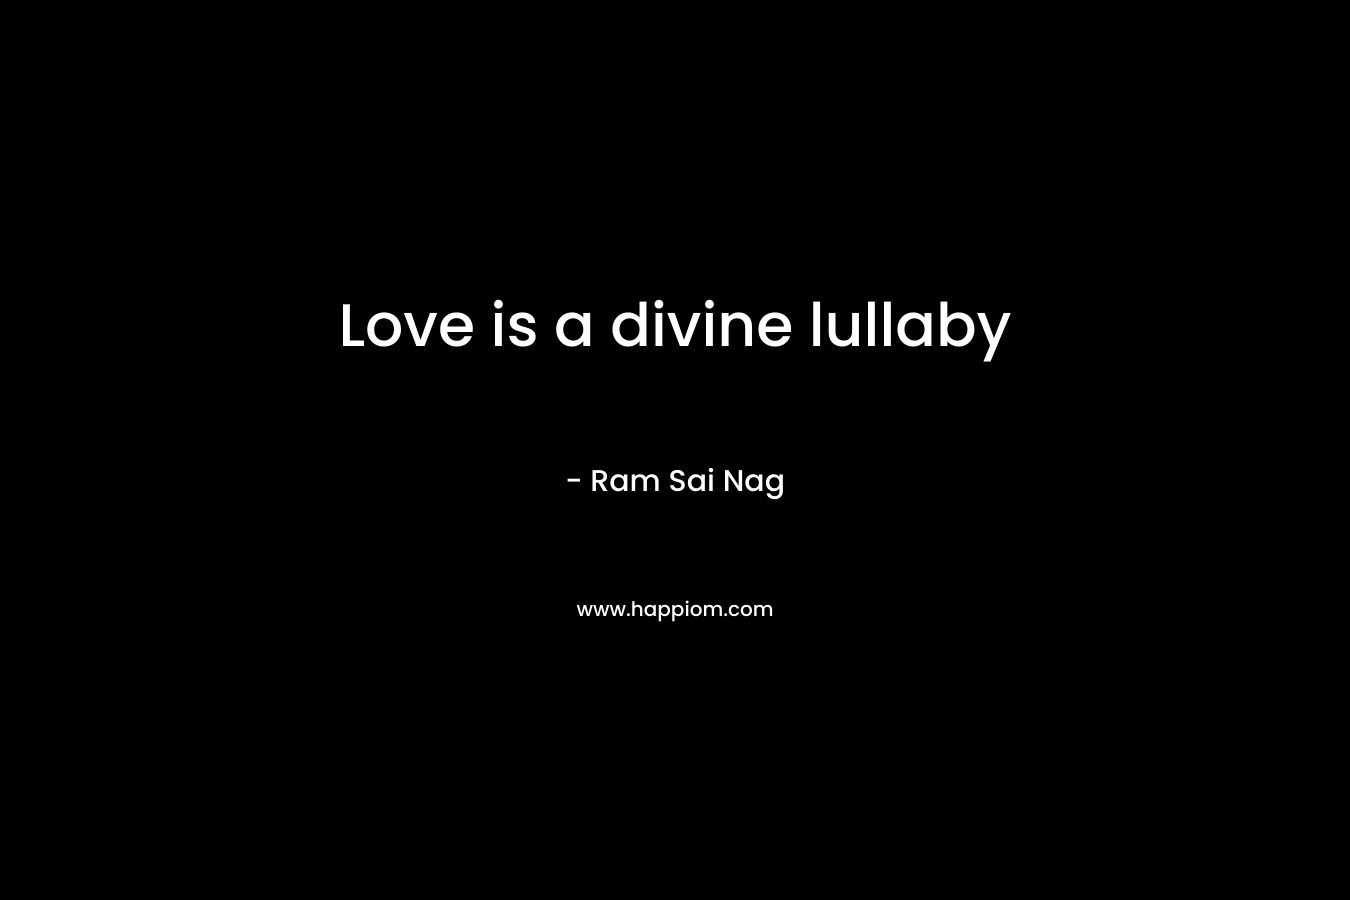 Love is a divine lullaby